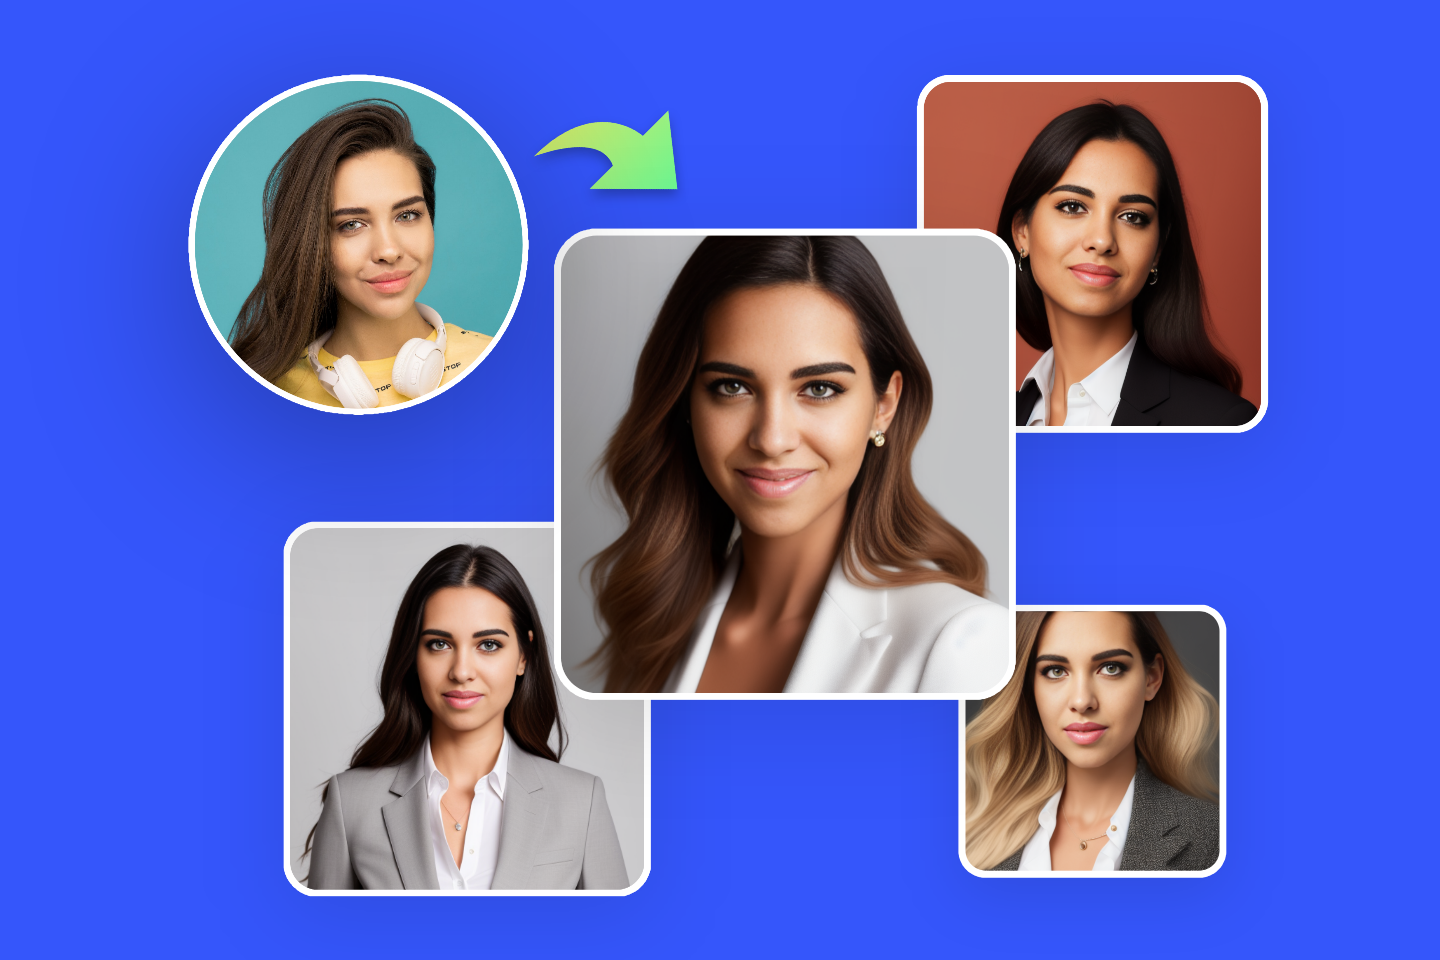 Use fotor online headshot filter to transform female selfie into four professional bussiness headshots